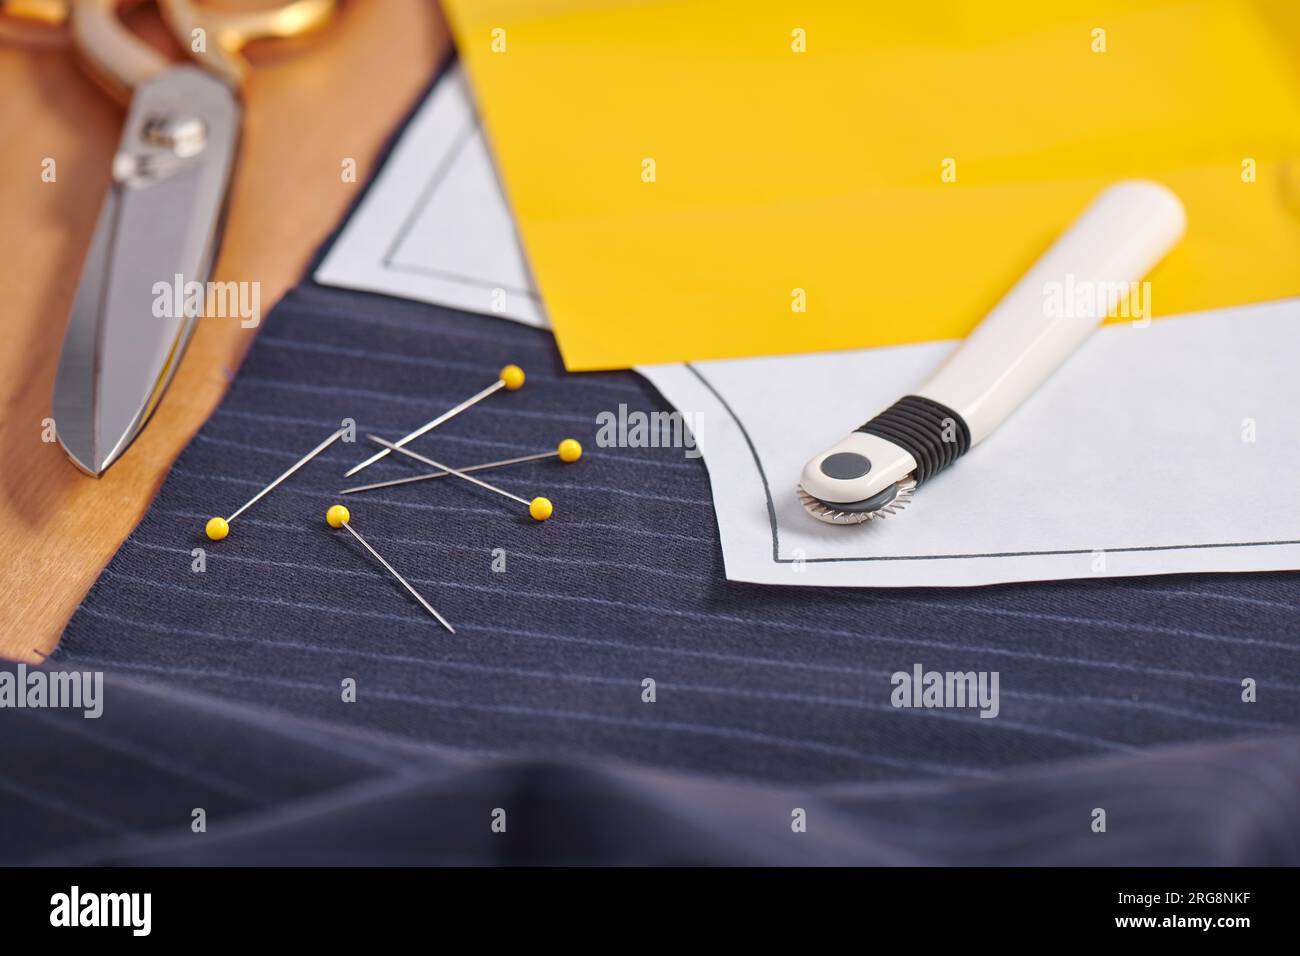 Sewing pattern on fabric, tracing wheel, tracing paper, sewing equipment  Stock Photo - Alamy